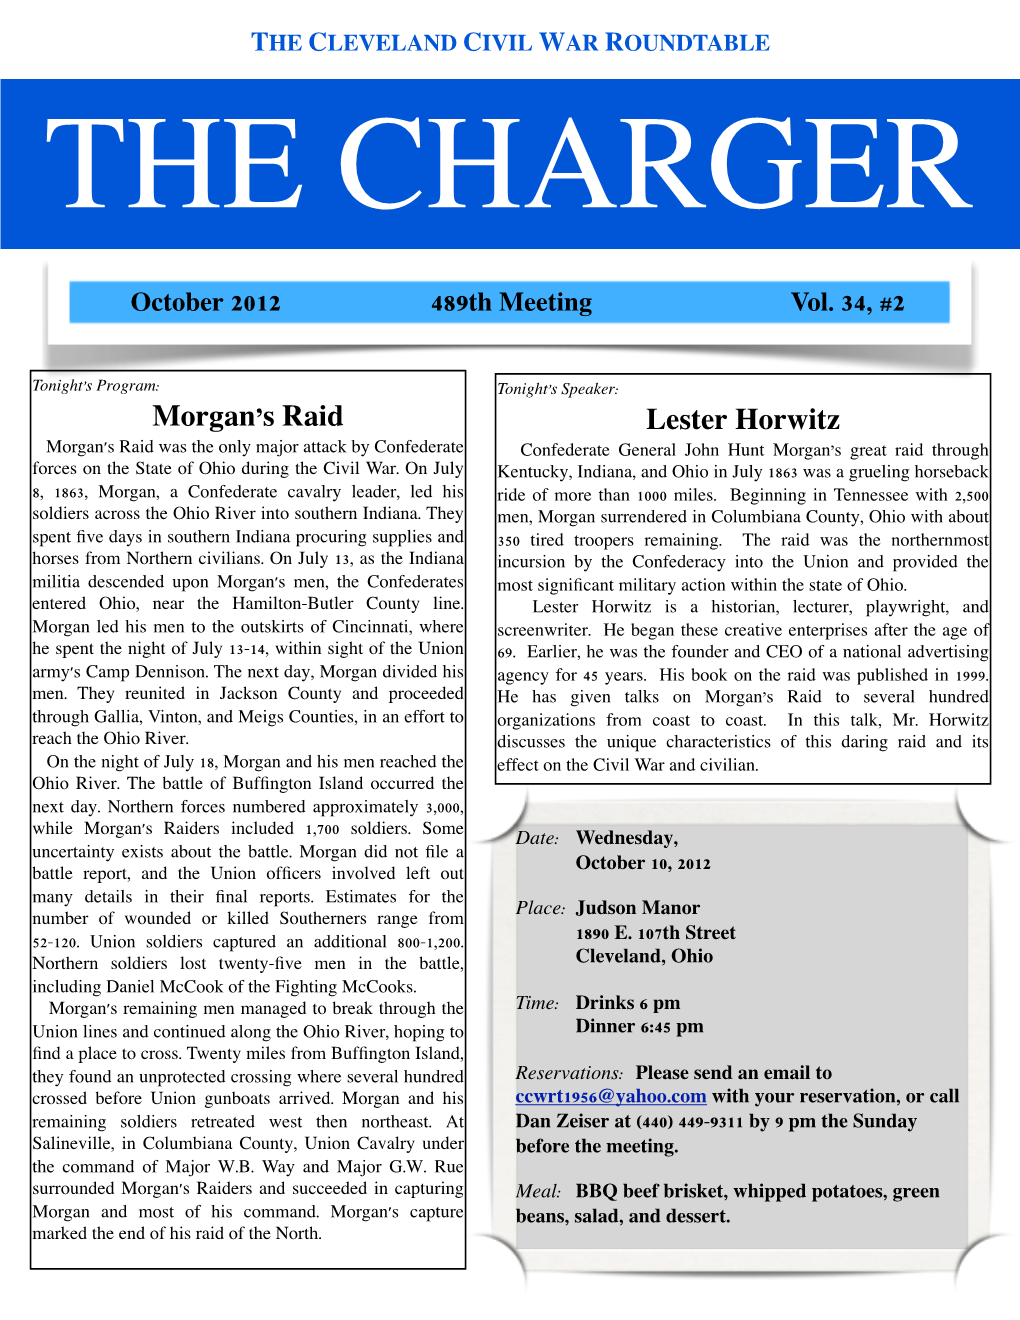 CHARGER, October 2012